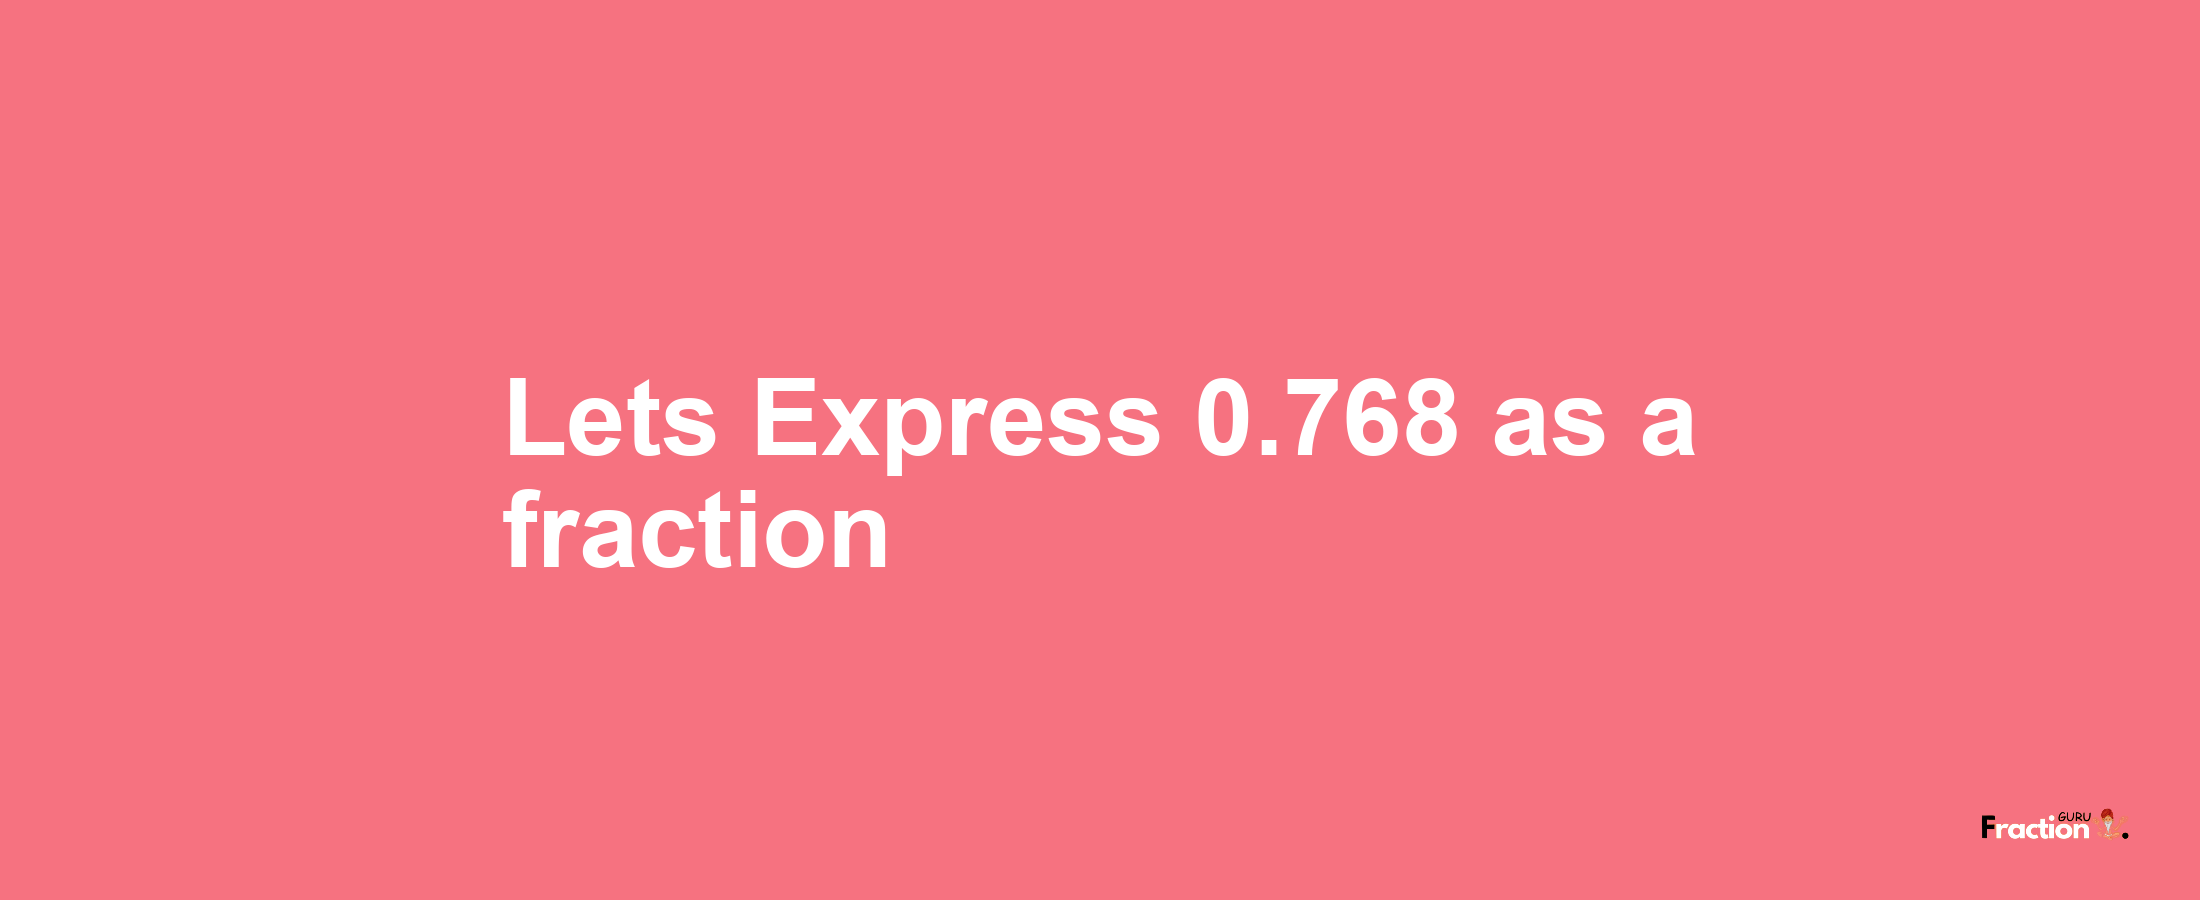 Lets Express 0.768 as afraction